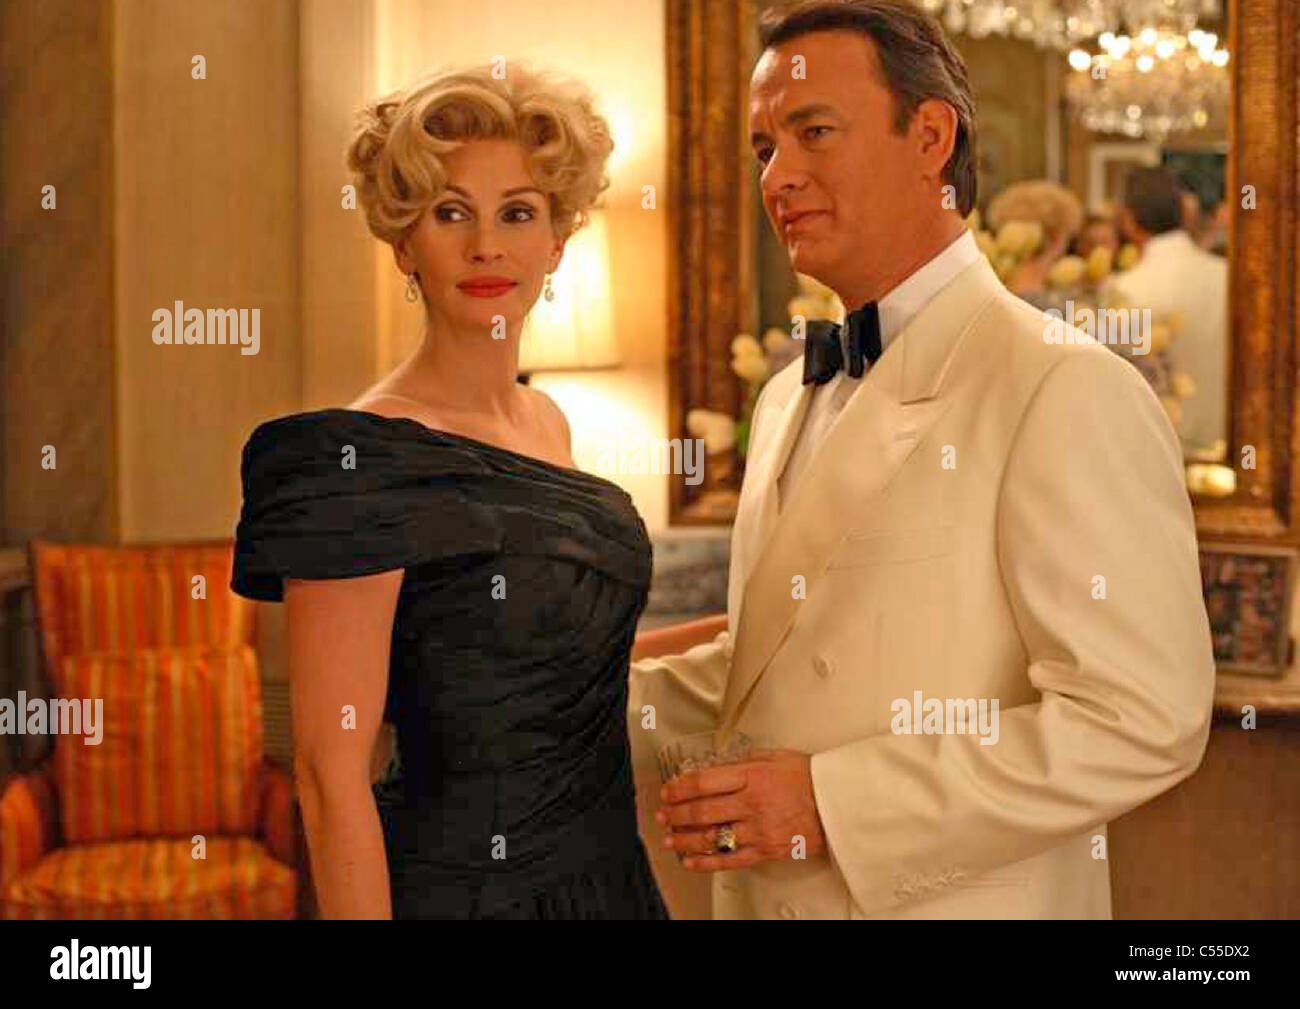 Tom Hanks Julia Roberts High Resolution Stock Photography and Images - Alamy